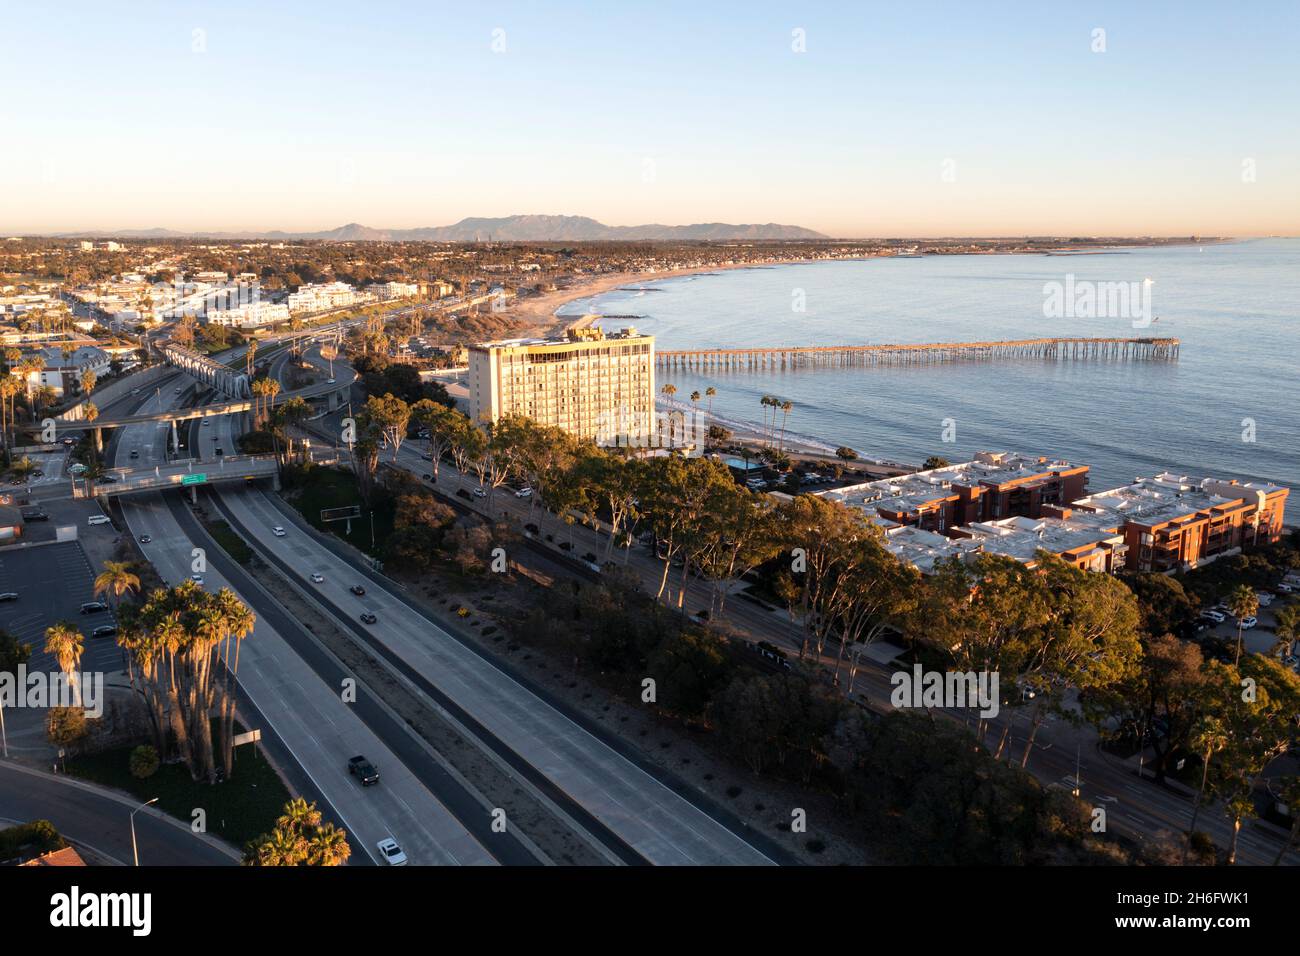 Aerial view of the Ventura, California waterfront and pier Stock Photo